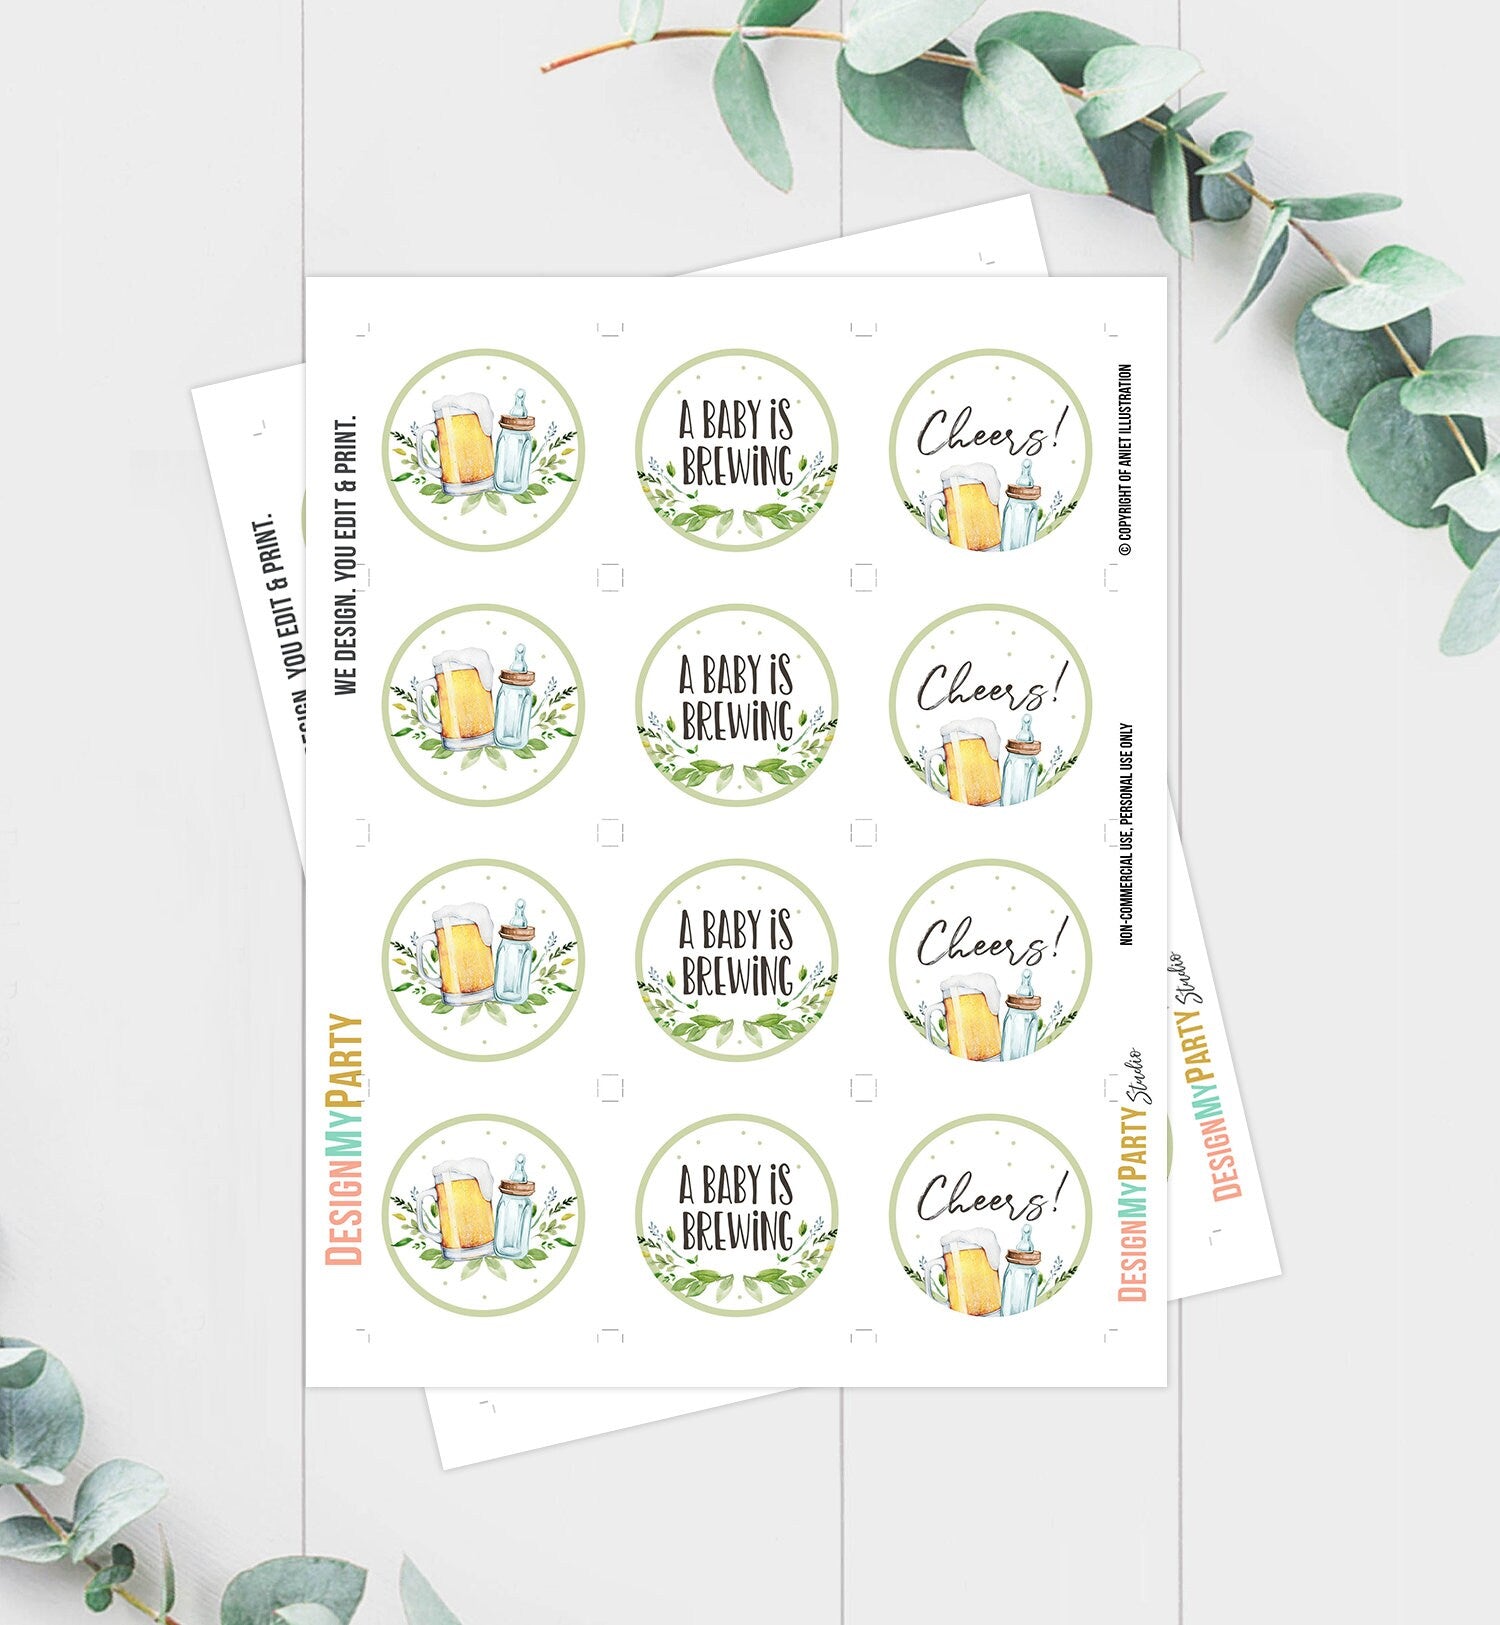 A Baby is Brewing Cupcake Toppers Favor Tags Bottle an Beers Baby Shower Cheers Party Decor Shower Greenery Download Digital PRINTABLE 0190